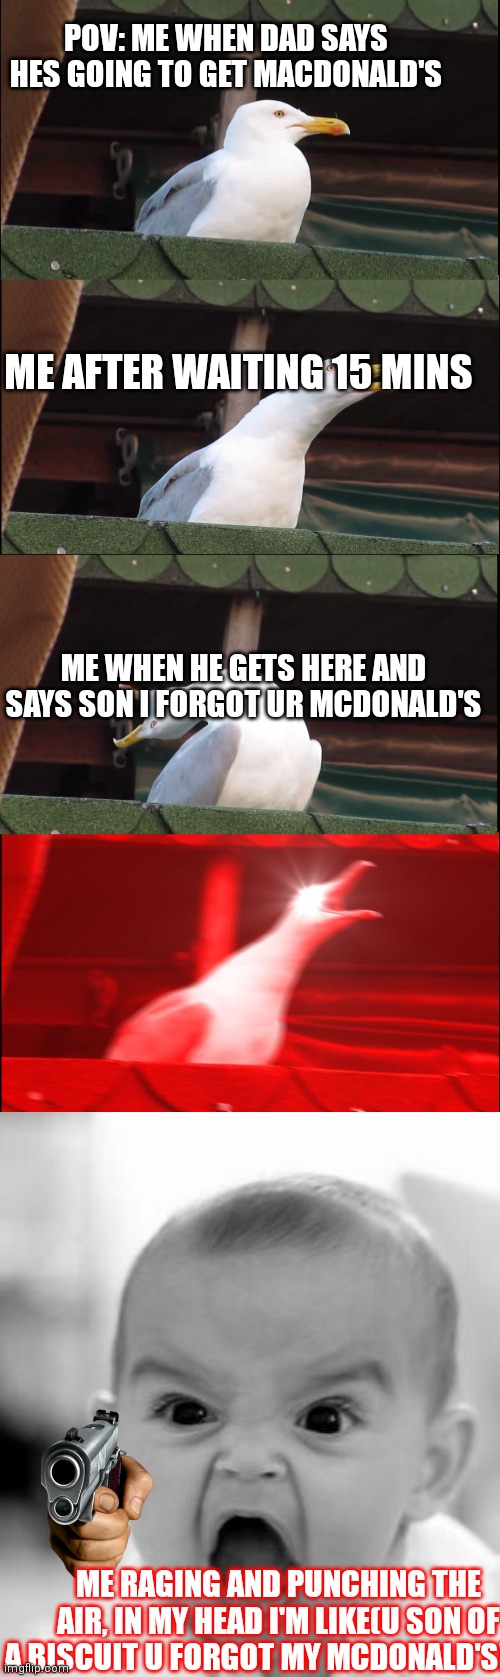 WHERE'S MY MCDONALD'S?! | POV: ME WHEN DAD SAYS HES GOING TO GET MACDONALD'S; ME AFTER WAITING 15 MINS; ME WHEN HE GETS HERE AND SAYS SON I FORGOT UR MCDONALD'S; ME RAGING AND PUNCHING THE AIR, IN MY HEAD I'M LIKE(U SON OF A BISCUIT U FORGOT MY MCDONALD'S!!!!!! | image tagged in memes,inhaling seagull,angry baby | made w/ Imgflip meme maker